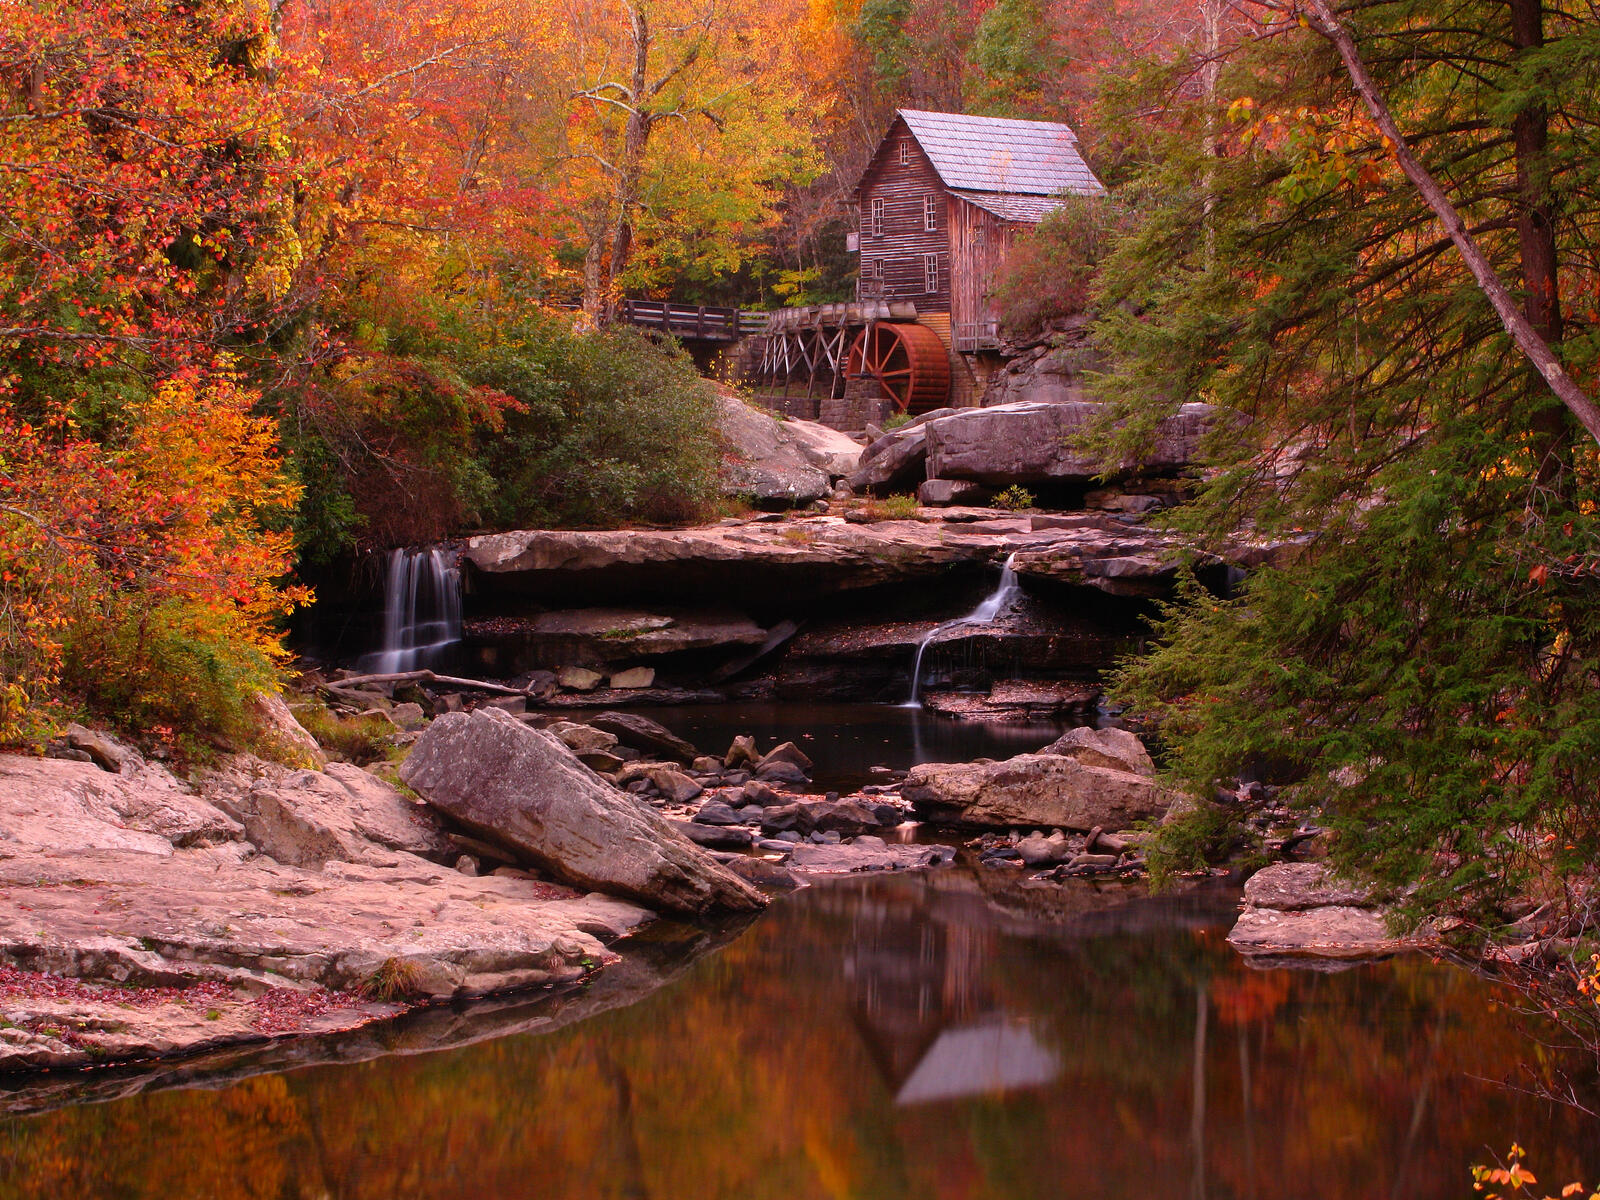 Wallpapers Glade Creek Grist Mill West Virginia autumn on the desktop